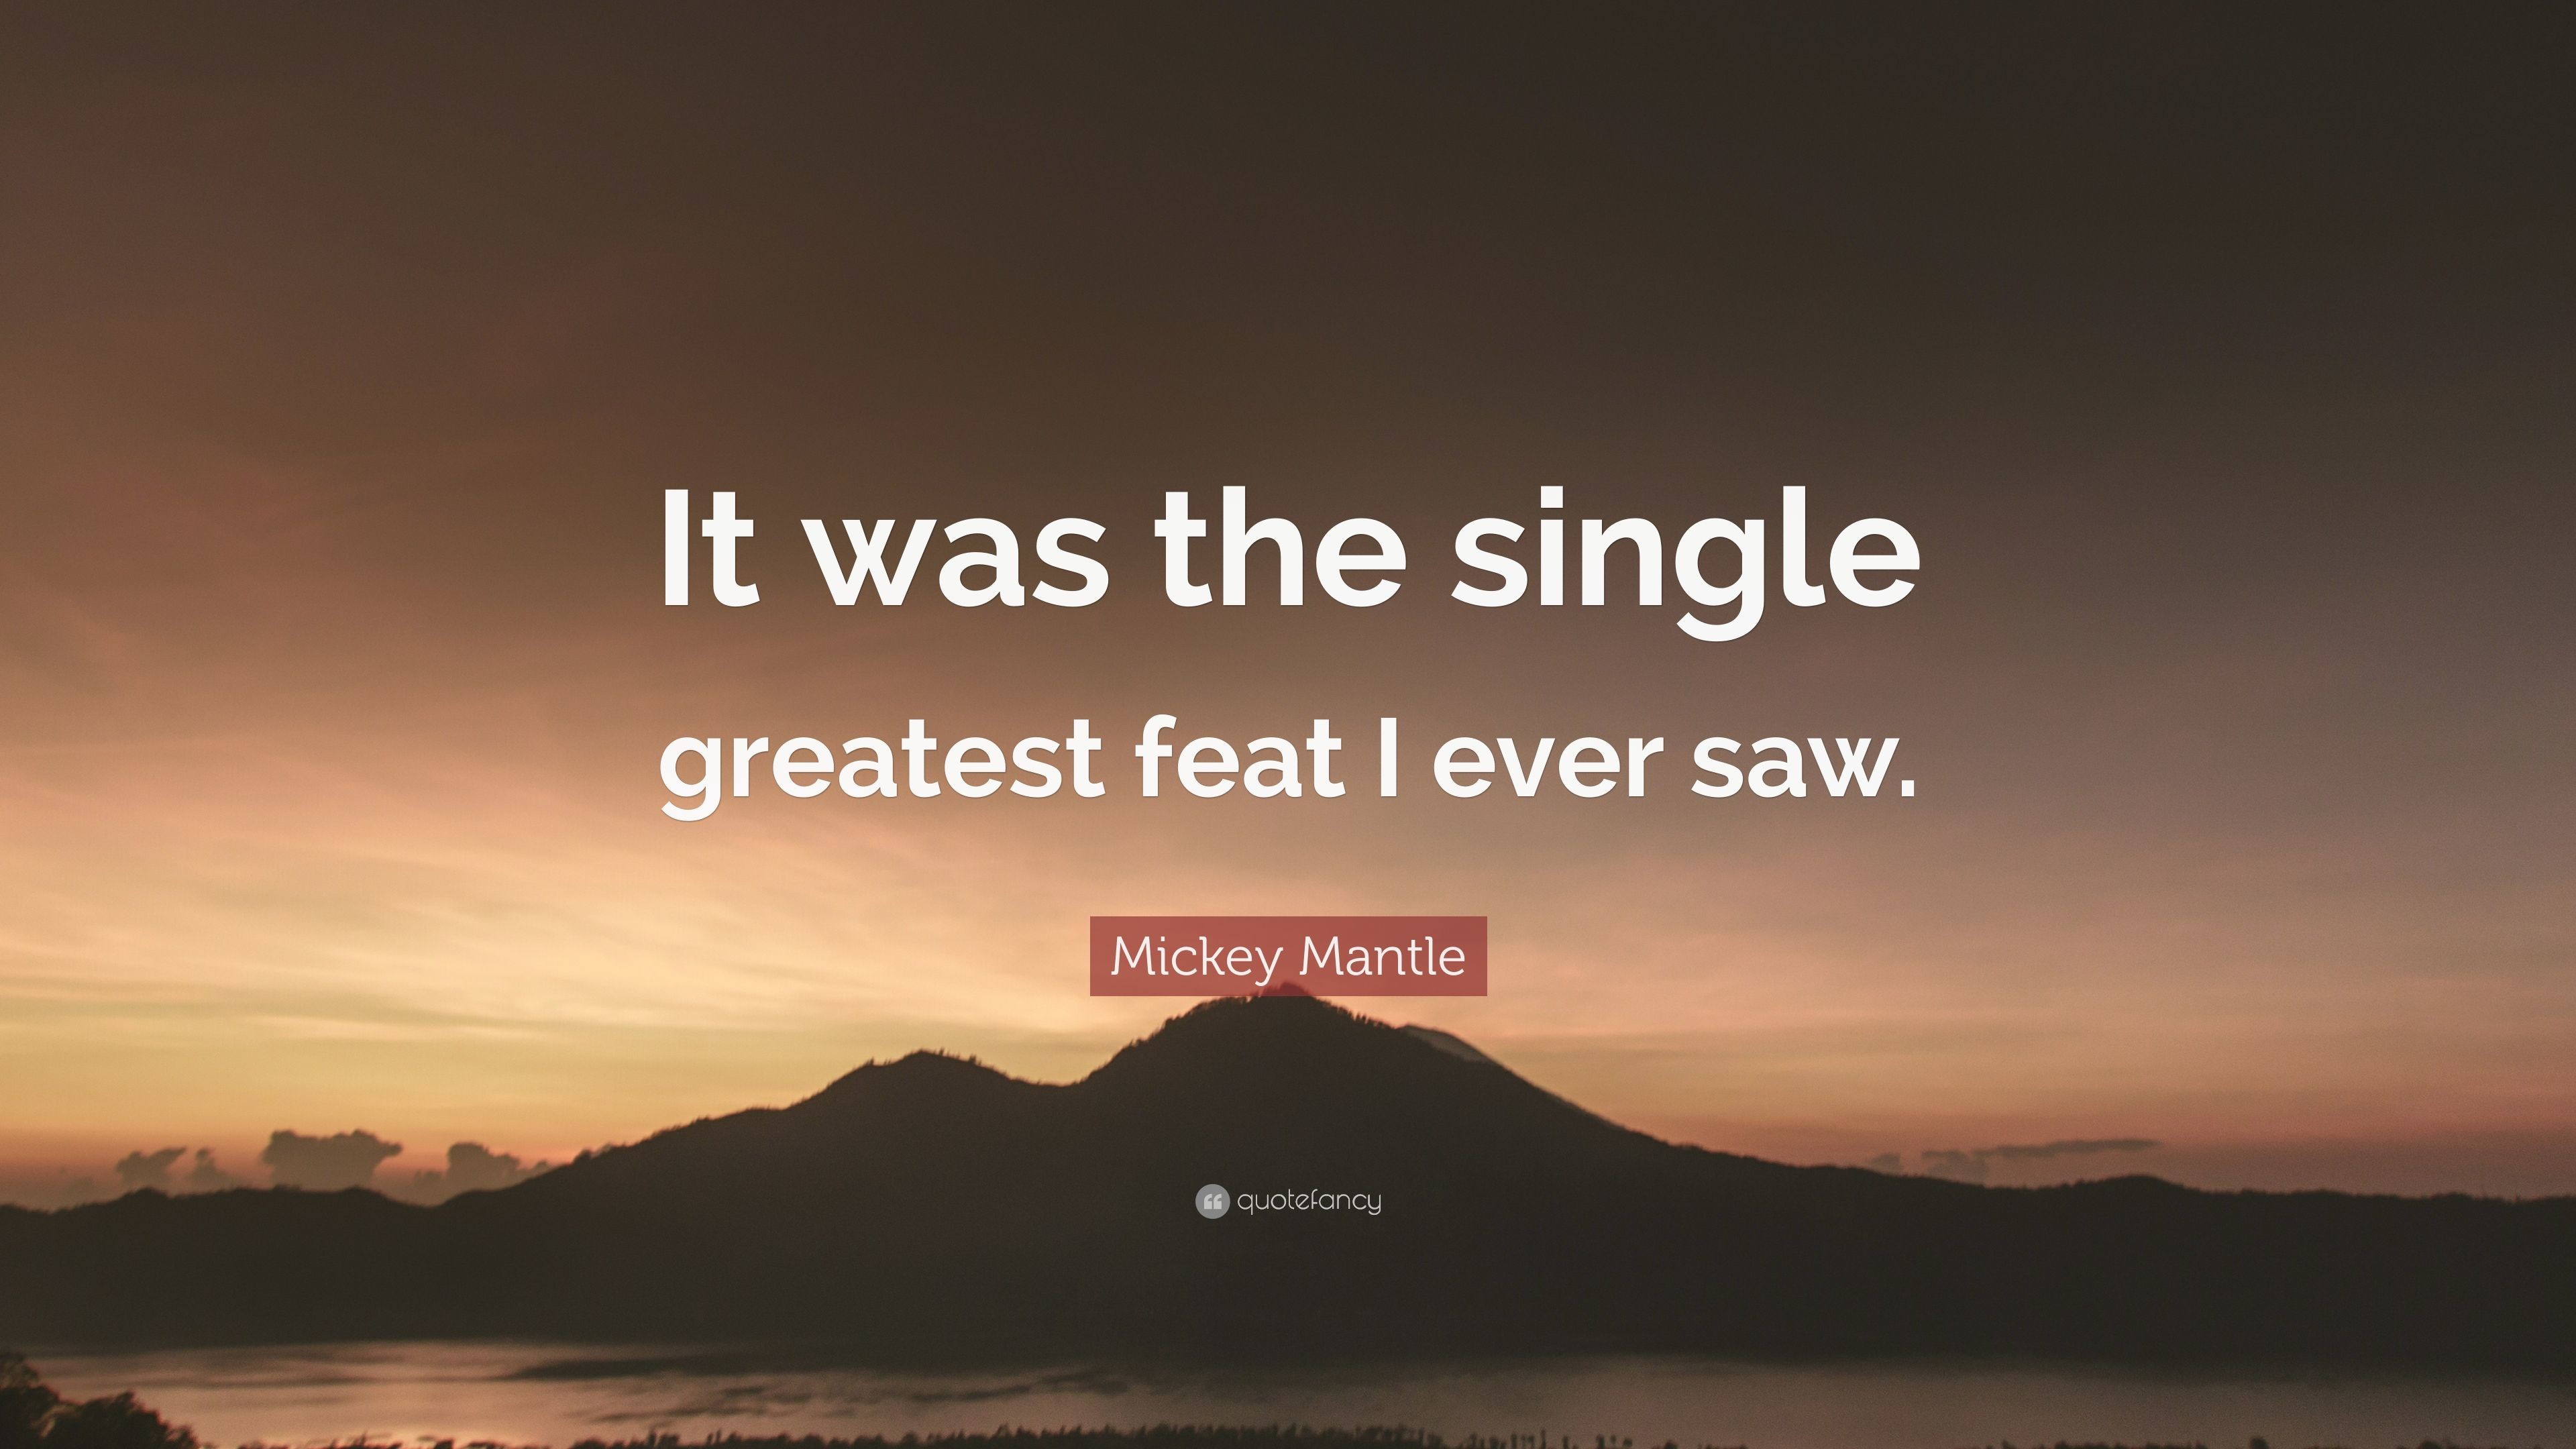 Mickey Mantle Quote It was the single greatest feat I ever saw.